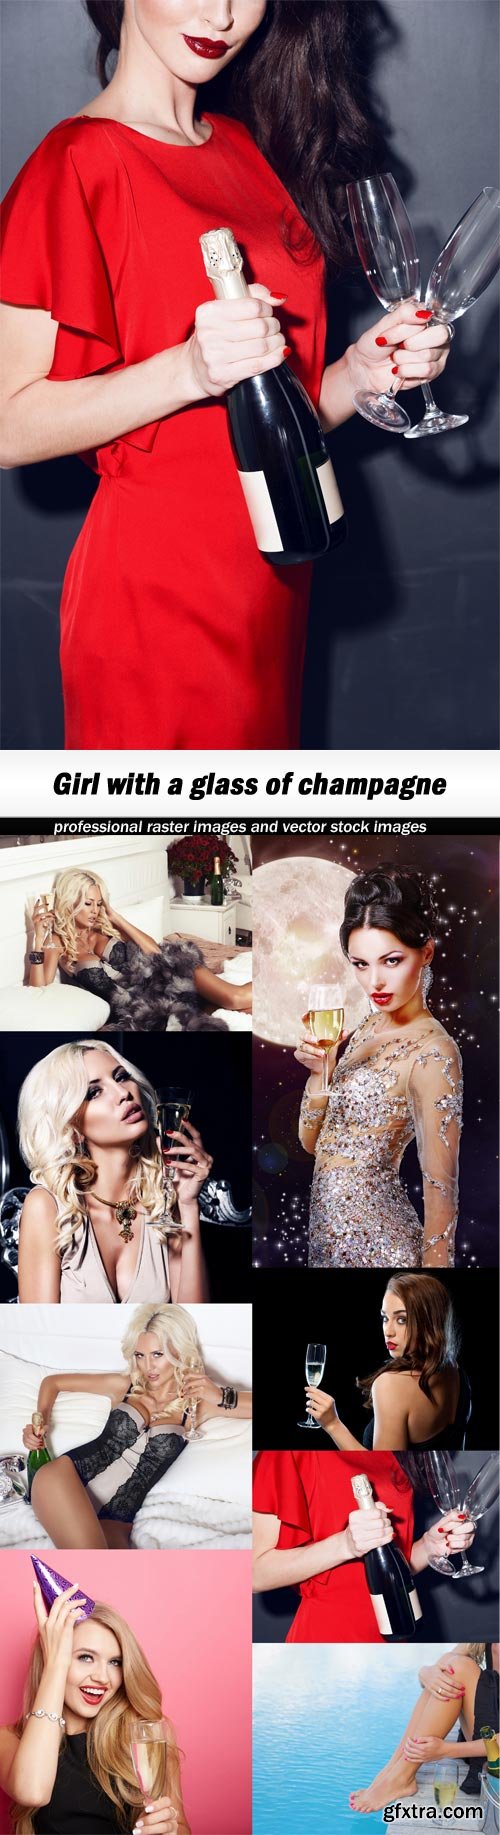 Girl with a glass of champagne